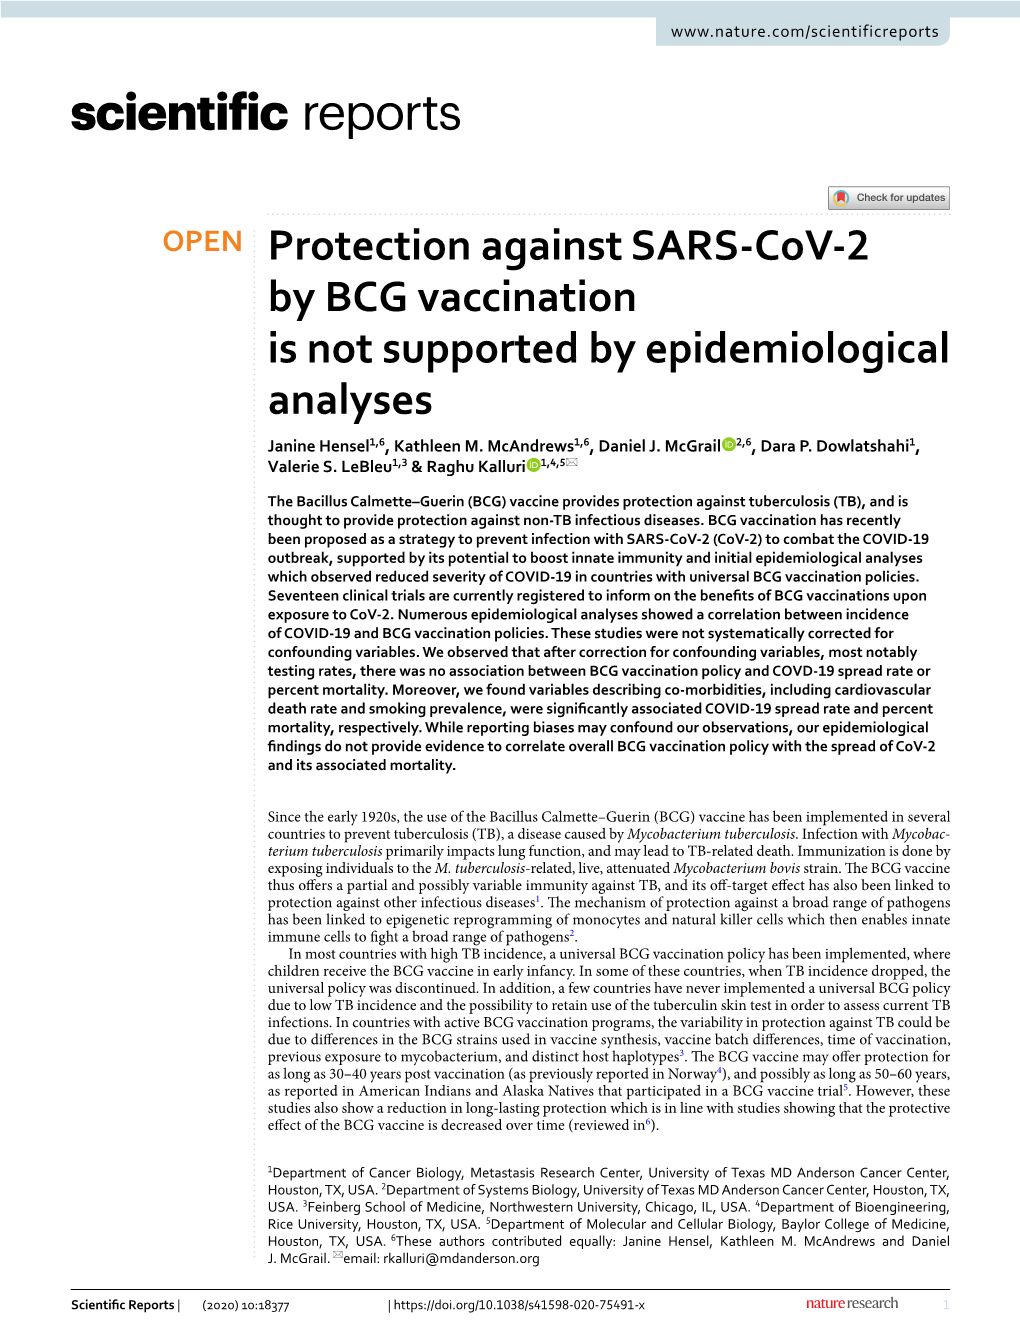 Protection Against SARS-Cov-2 by BCG Vaccination Is Not Supported